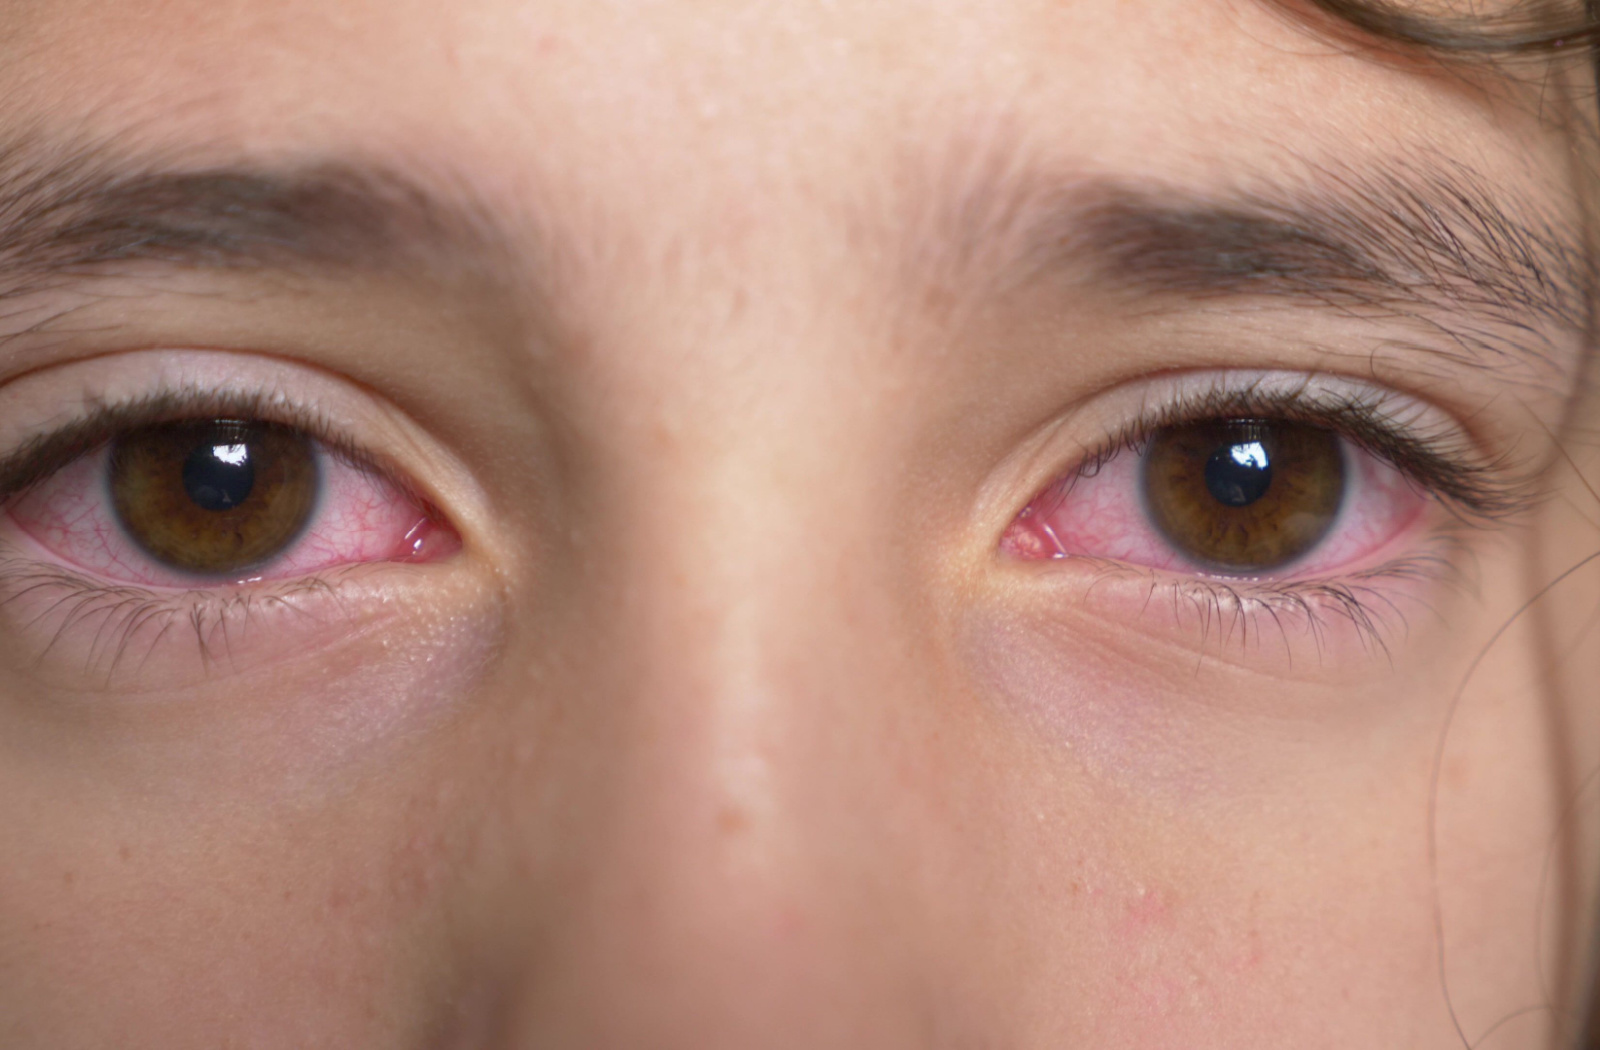 A close-up of a young child with redness in her eyes.